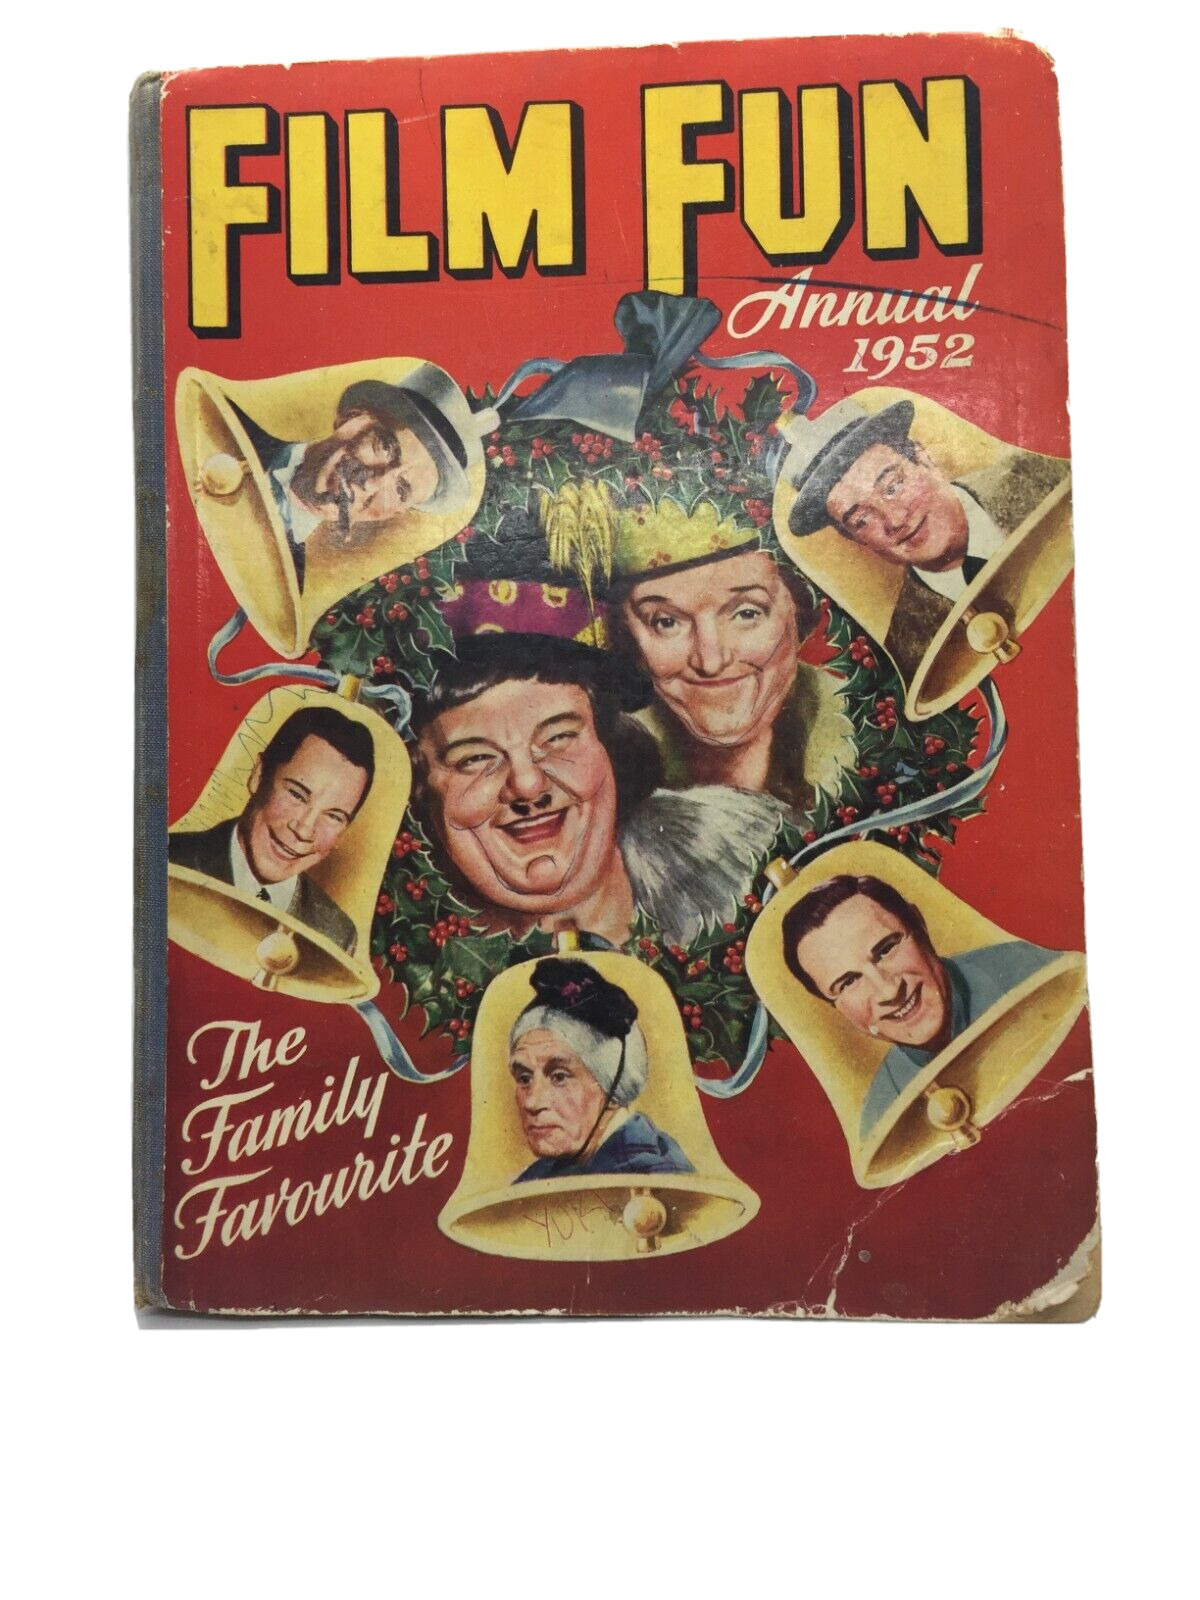 Film Fun Annual 1952 Laurel And Hardy On Cover